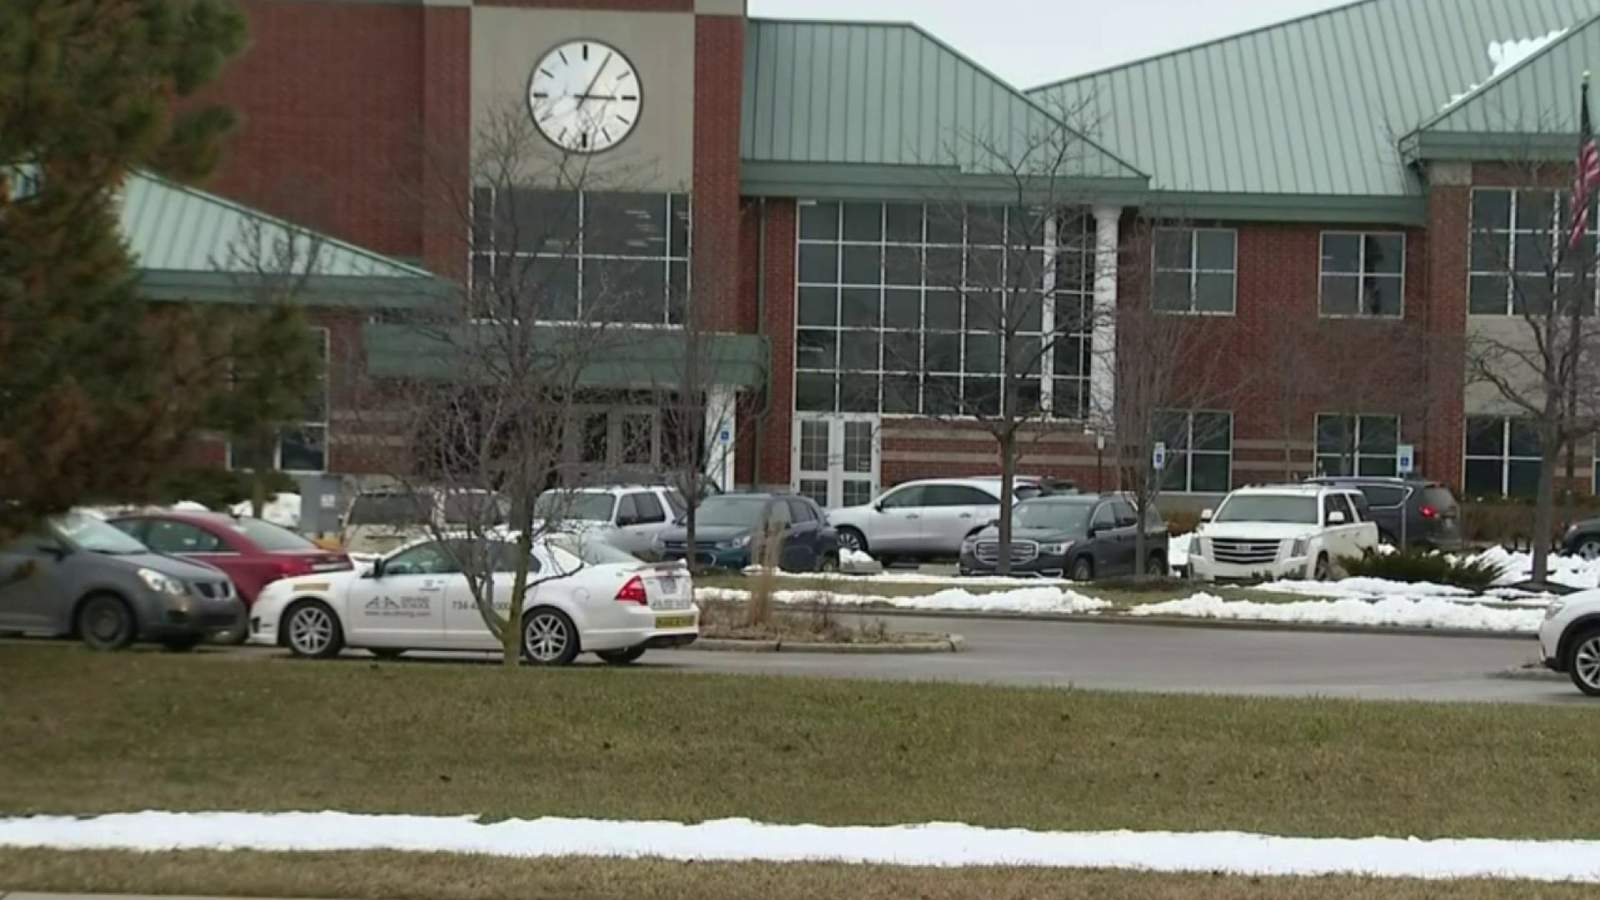 Northville High School teacher arrested, on leave amid 'serious allegations'